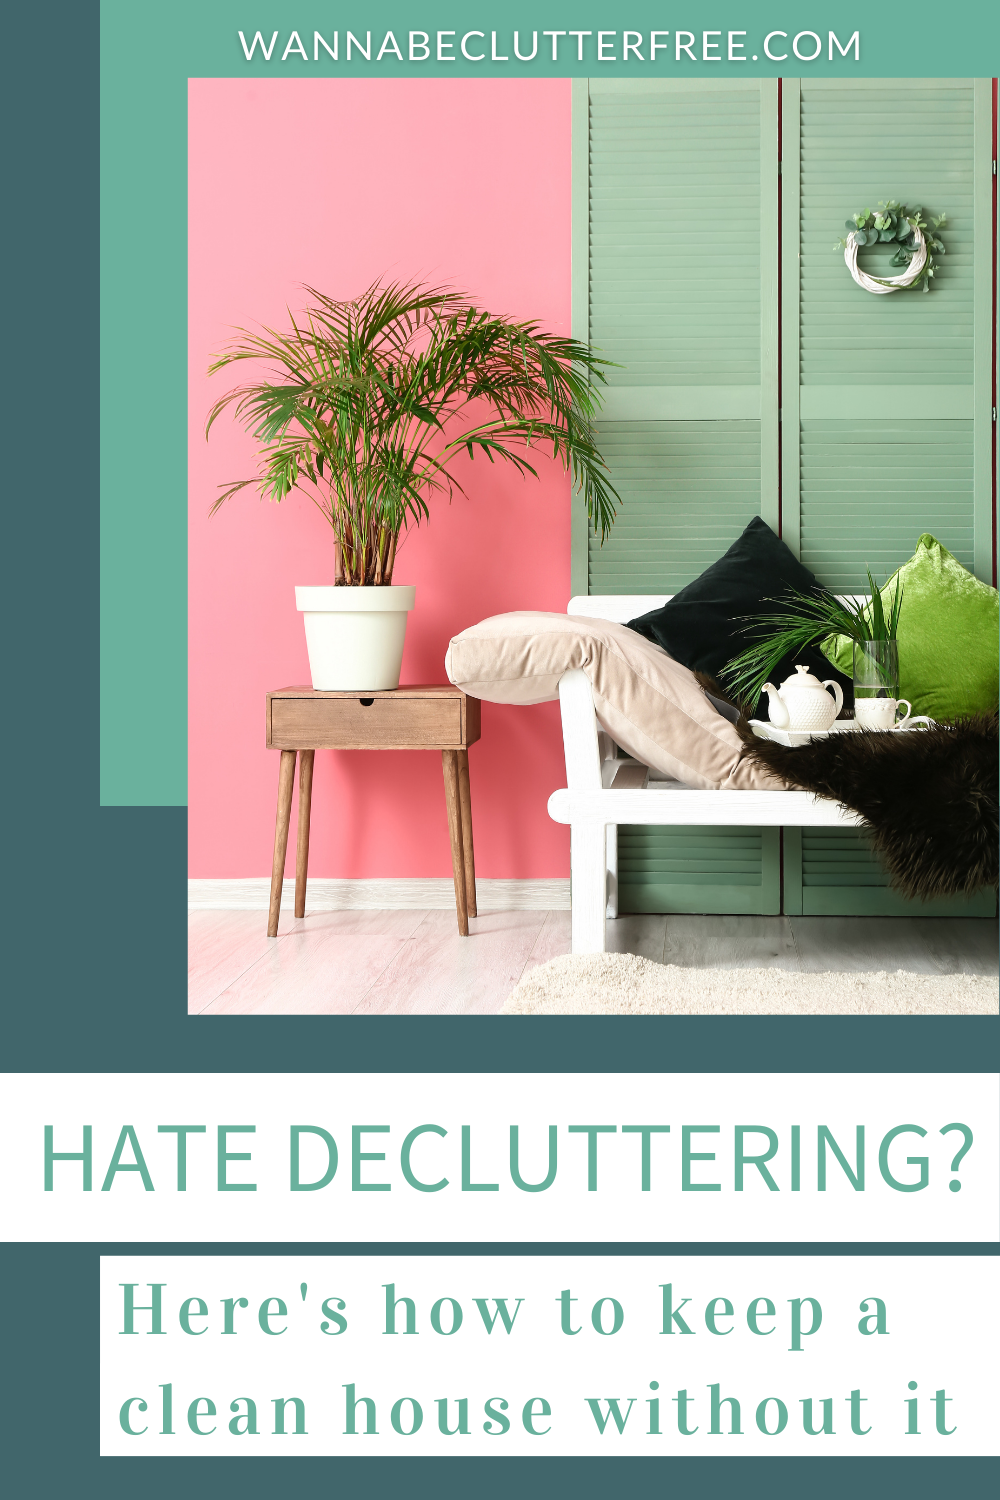 Hate decluttering? Here's how to keep a clean home without it.